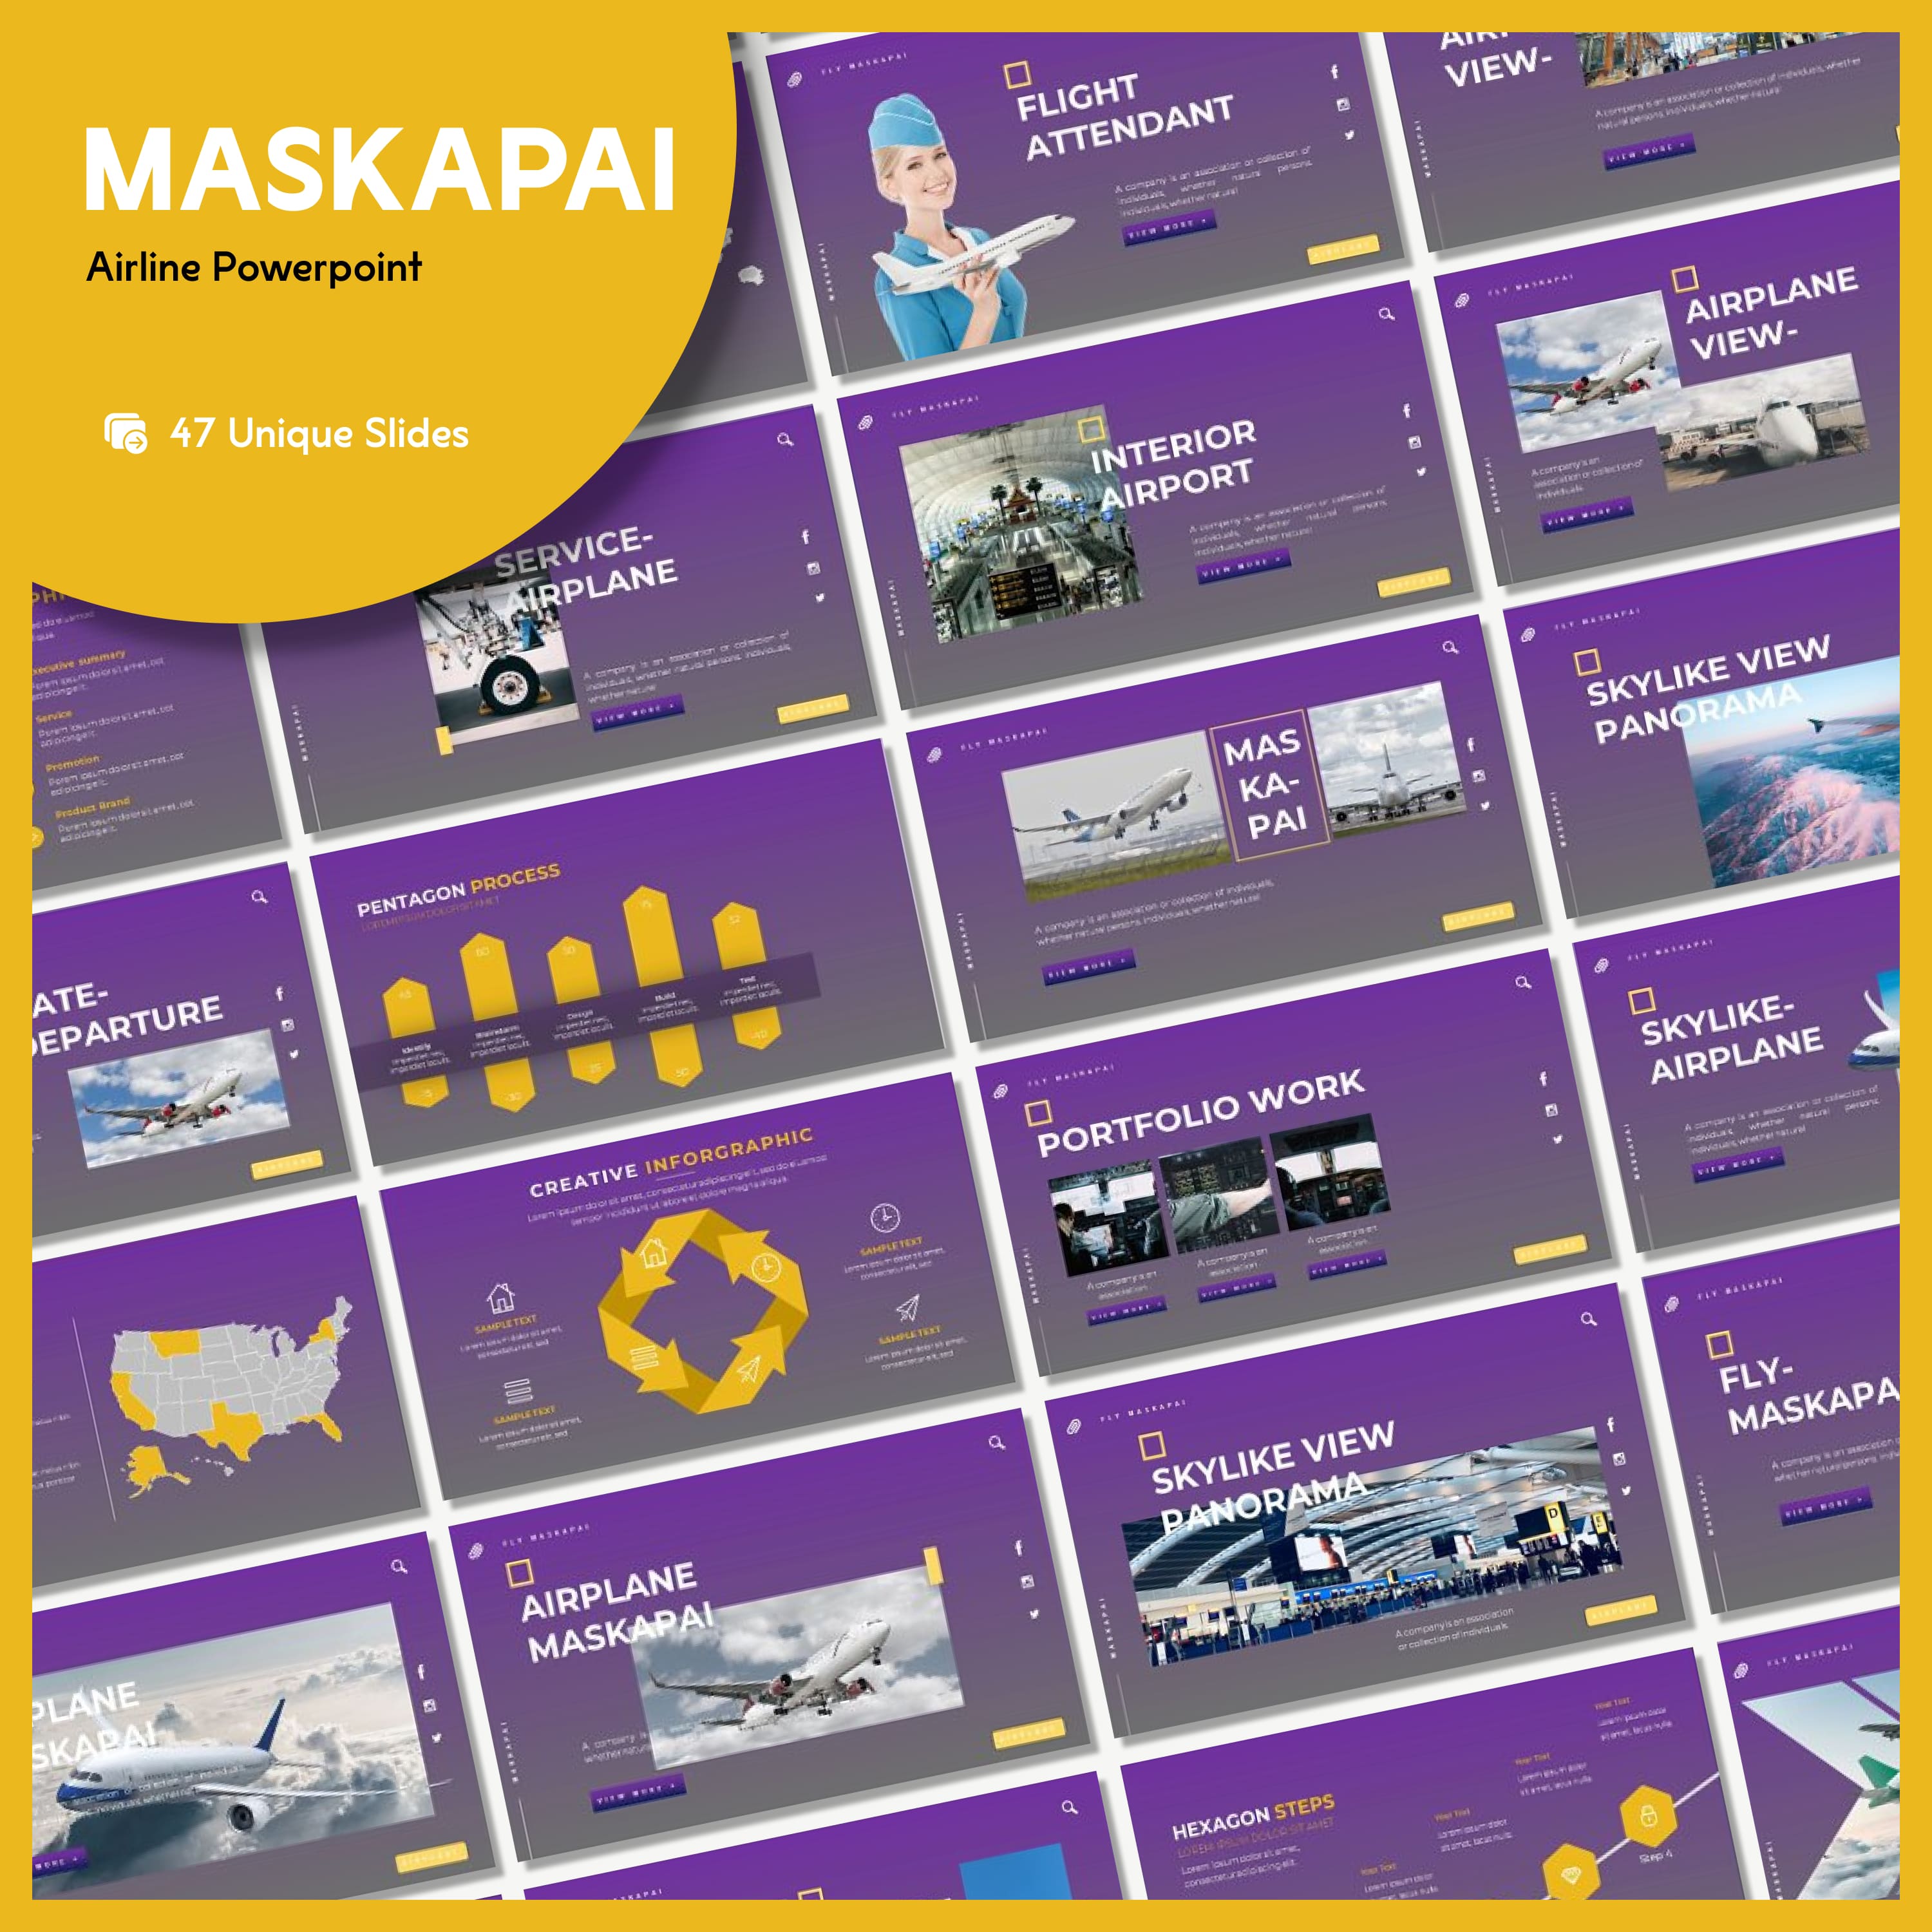 Maskapai airline powerpoint - main image preview.